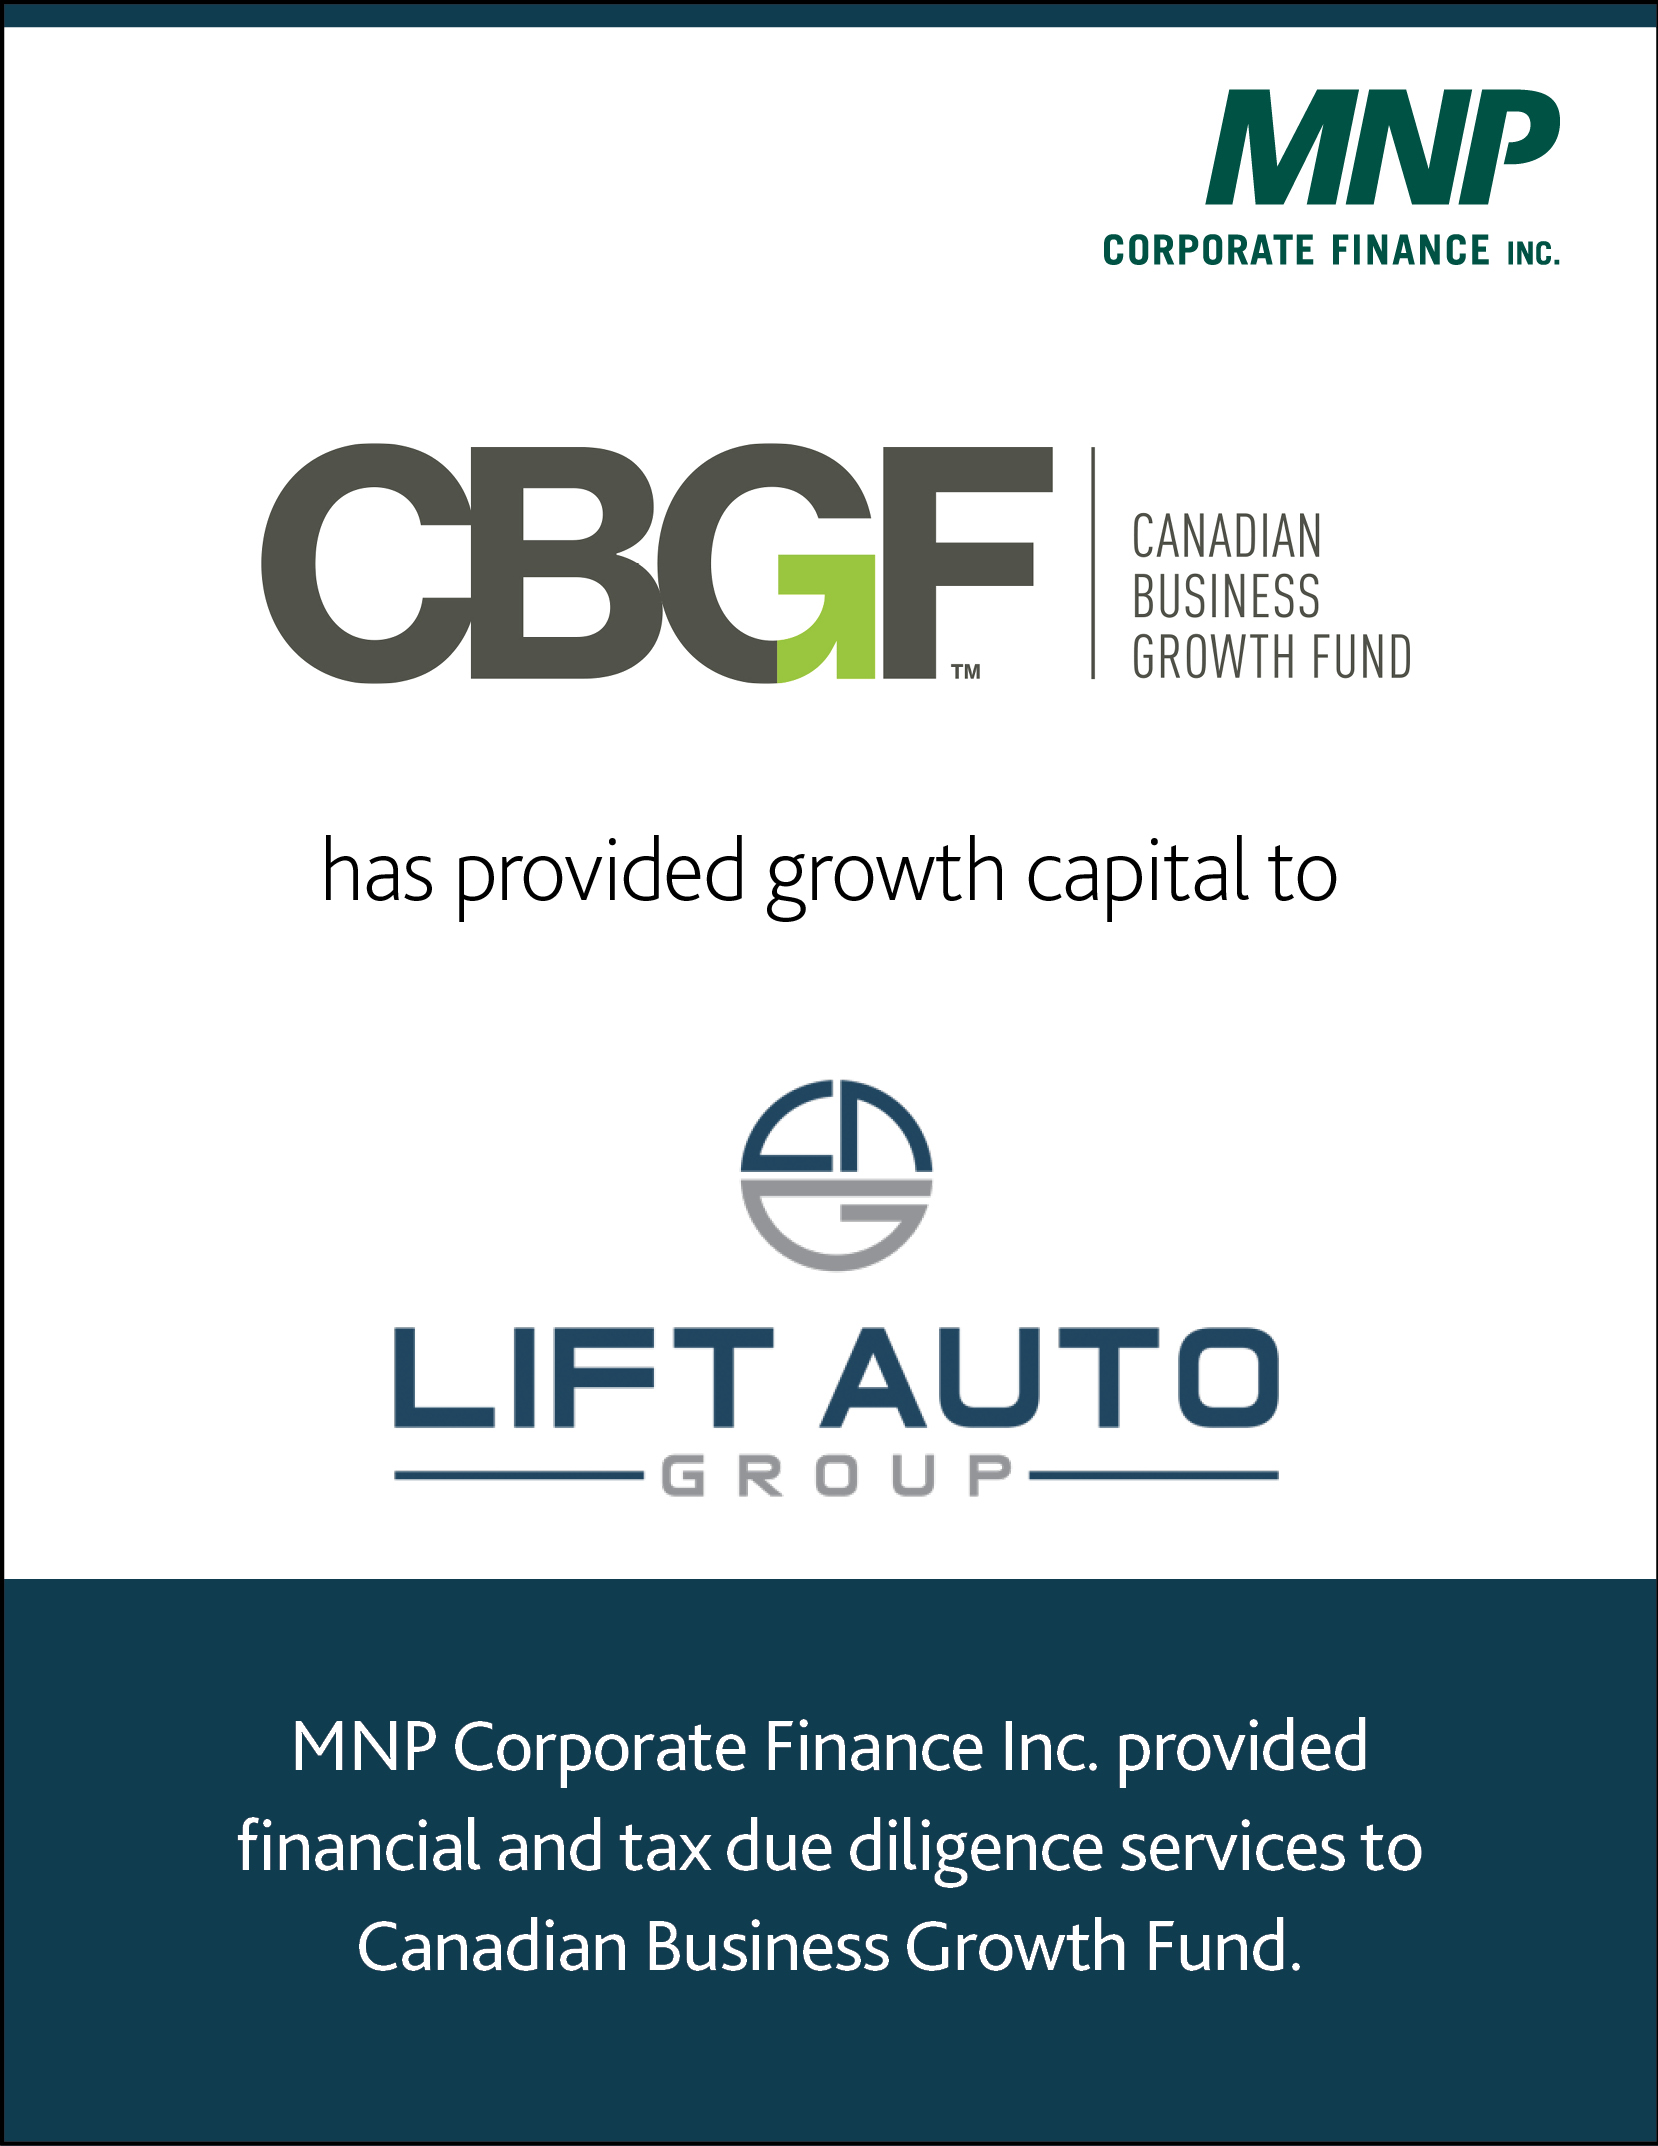 Canadian Business Growth Fund has provided growth capital to Lift Auto Group